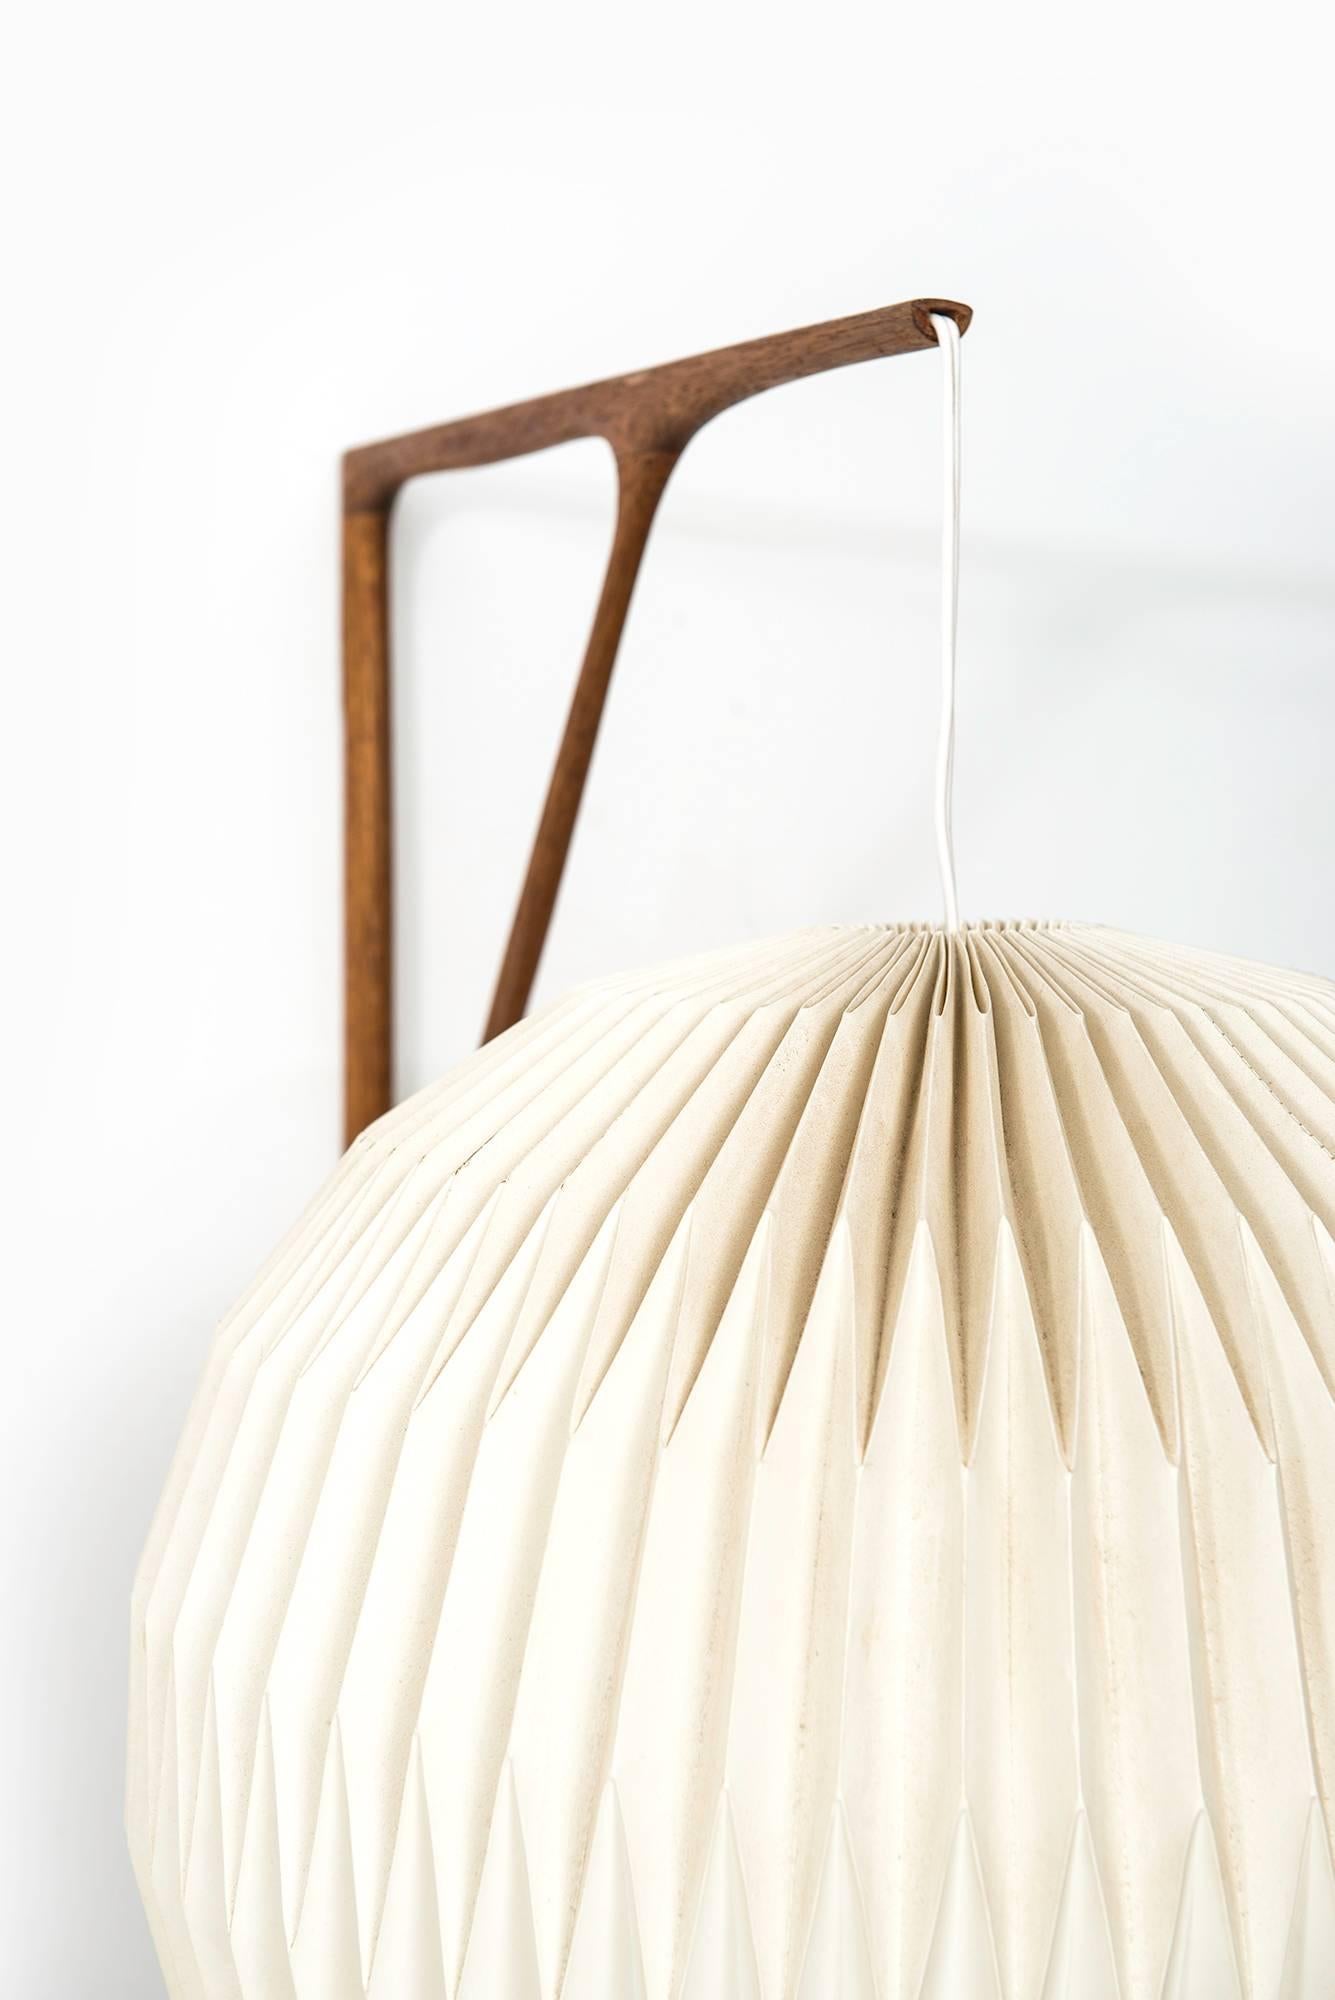 Mid-20th Century Sculptural Wall Lamp in Teak with Lamp Shade by Le Klint